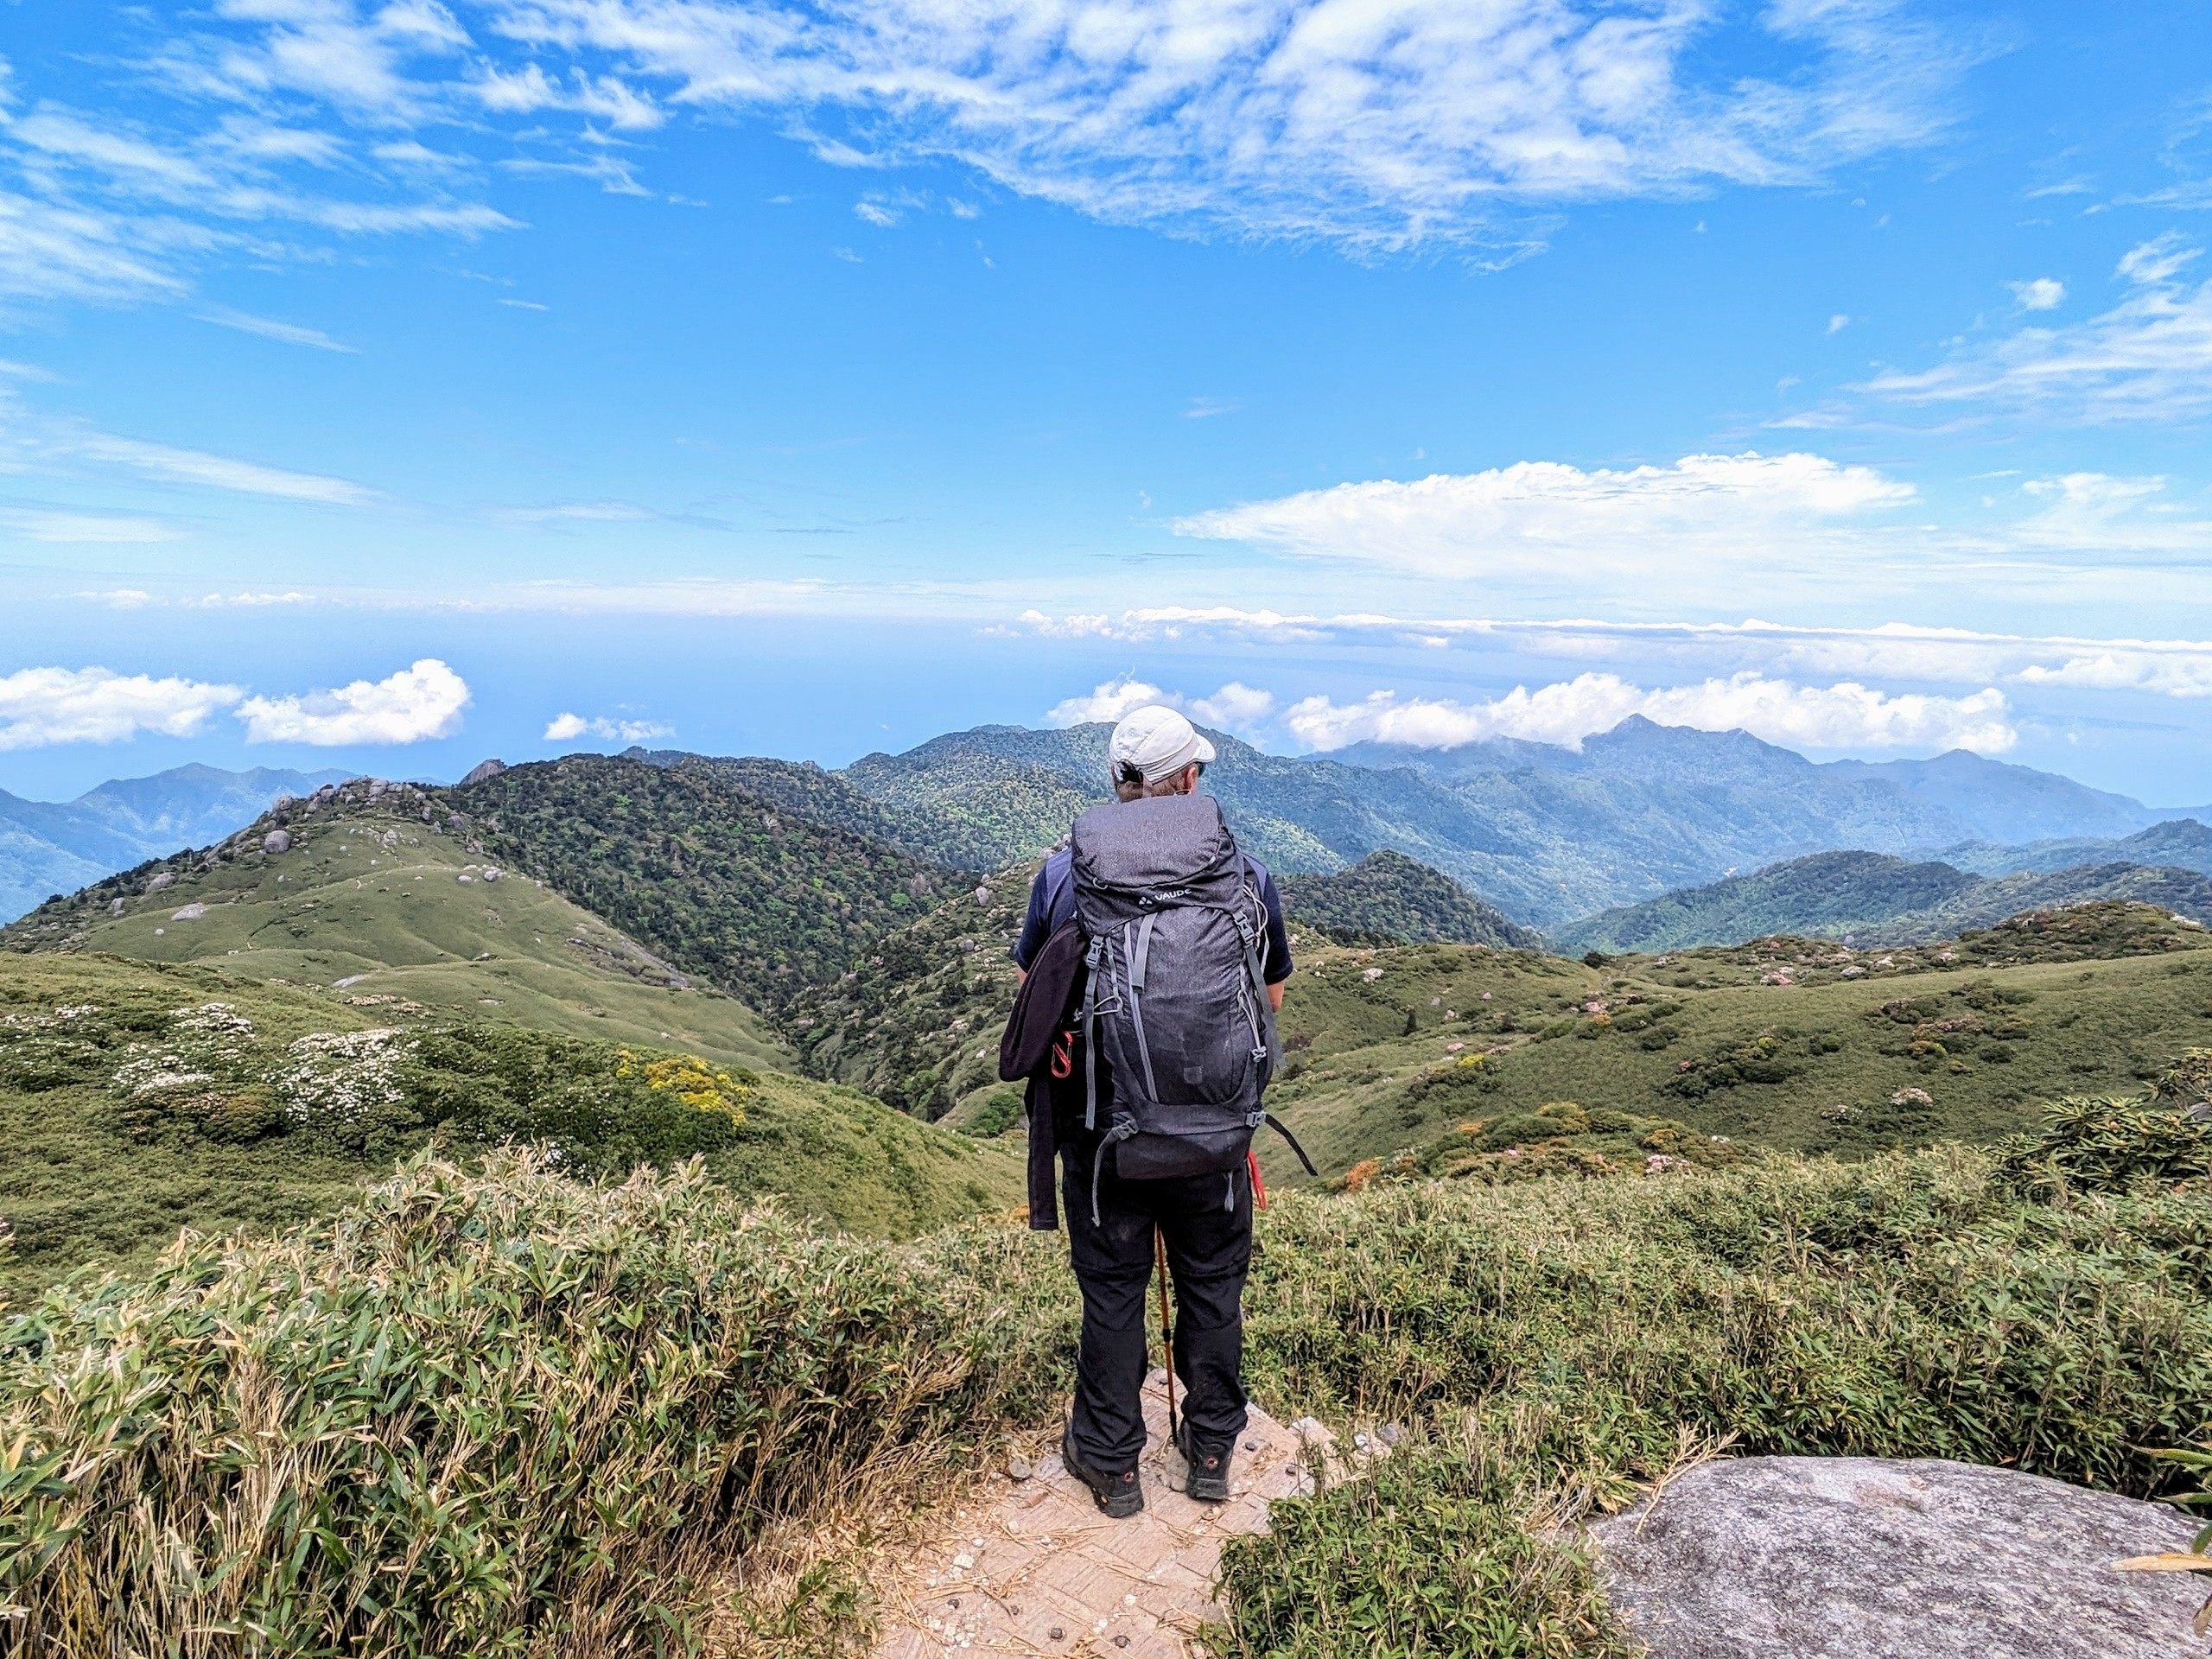 Hiking the trails of Yakushima, in southern Japan. Photo: Fiona Ching